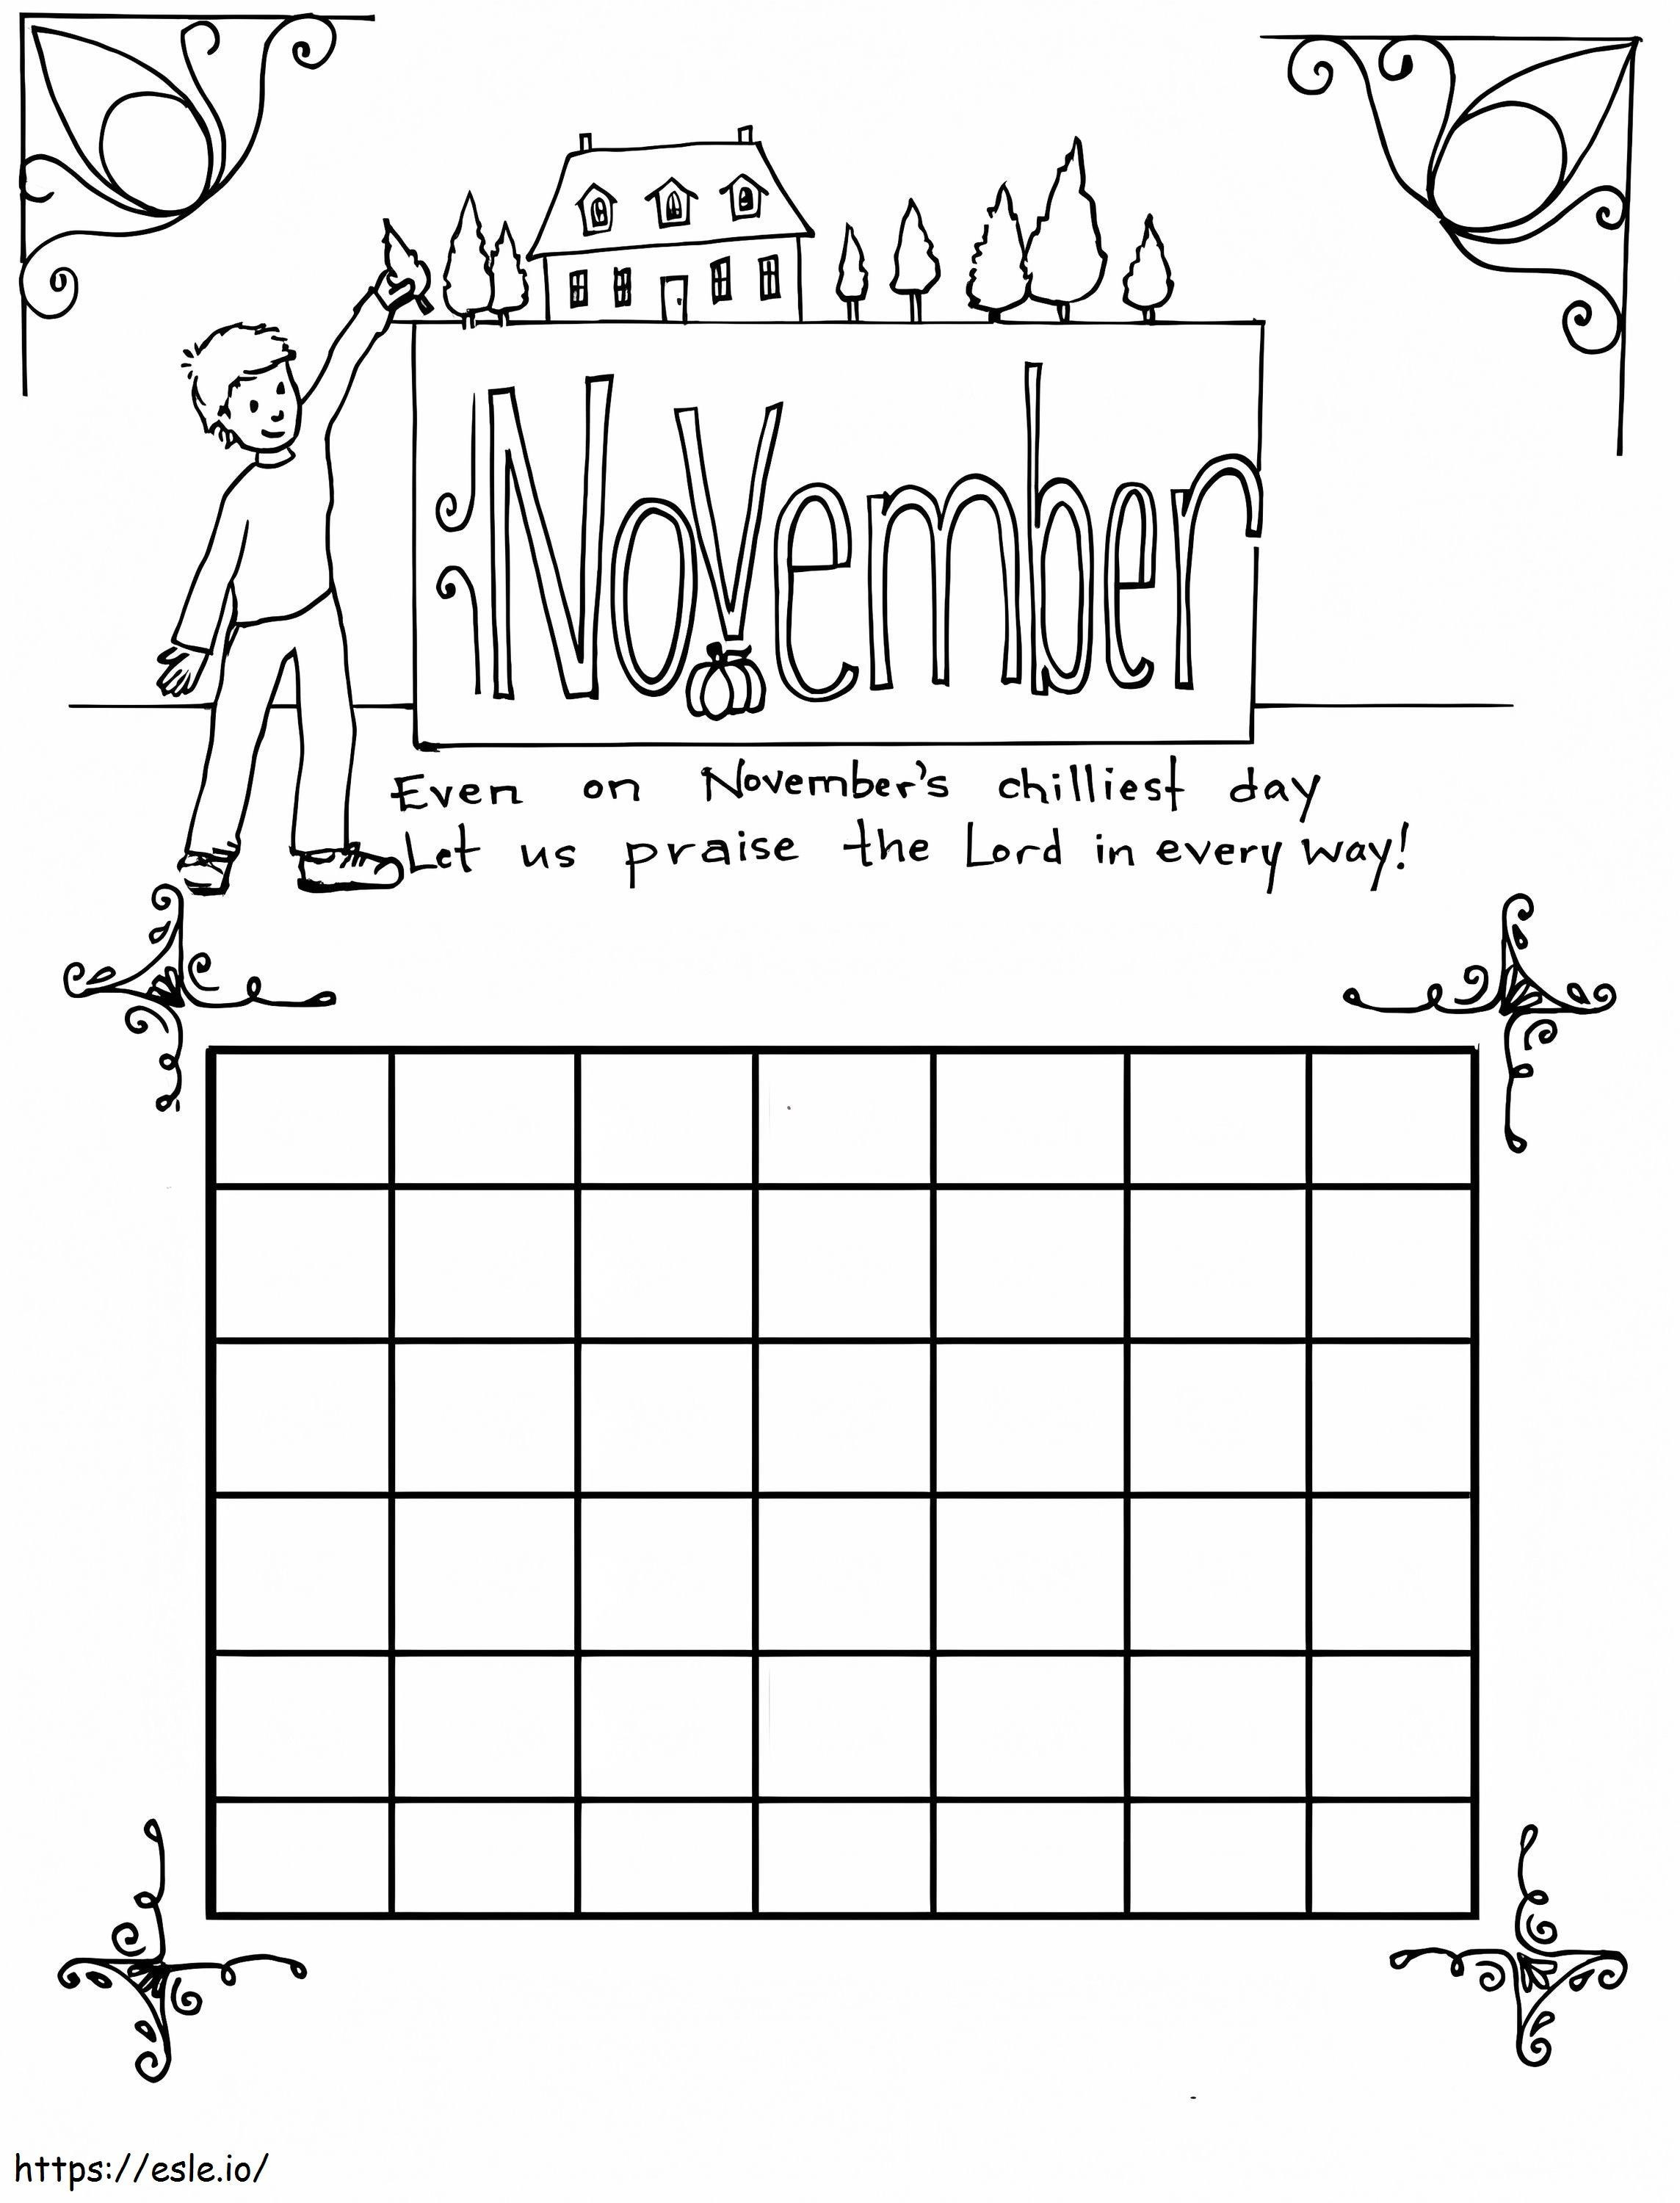 Calendar For November 1 coloring page